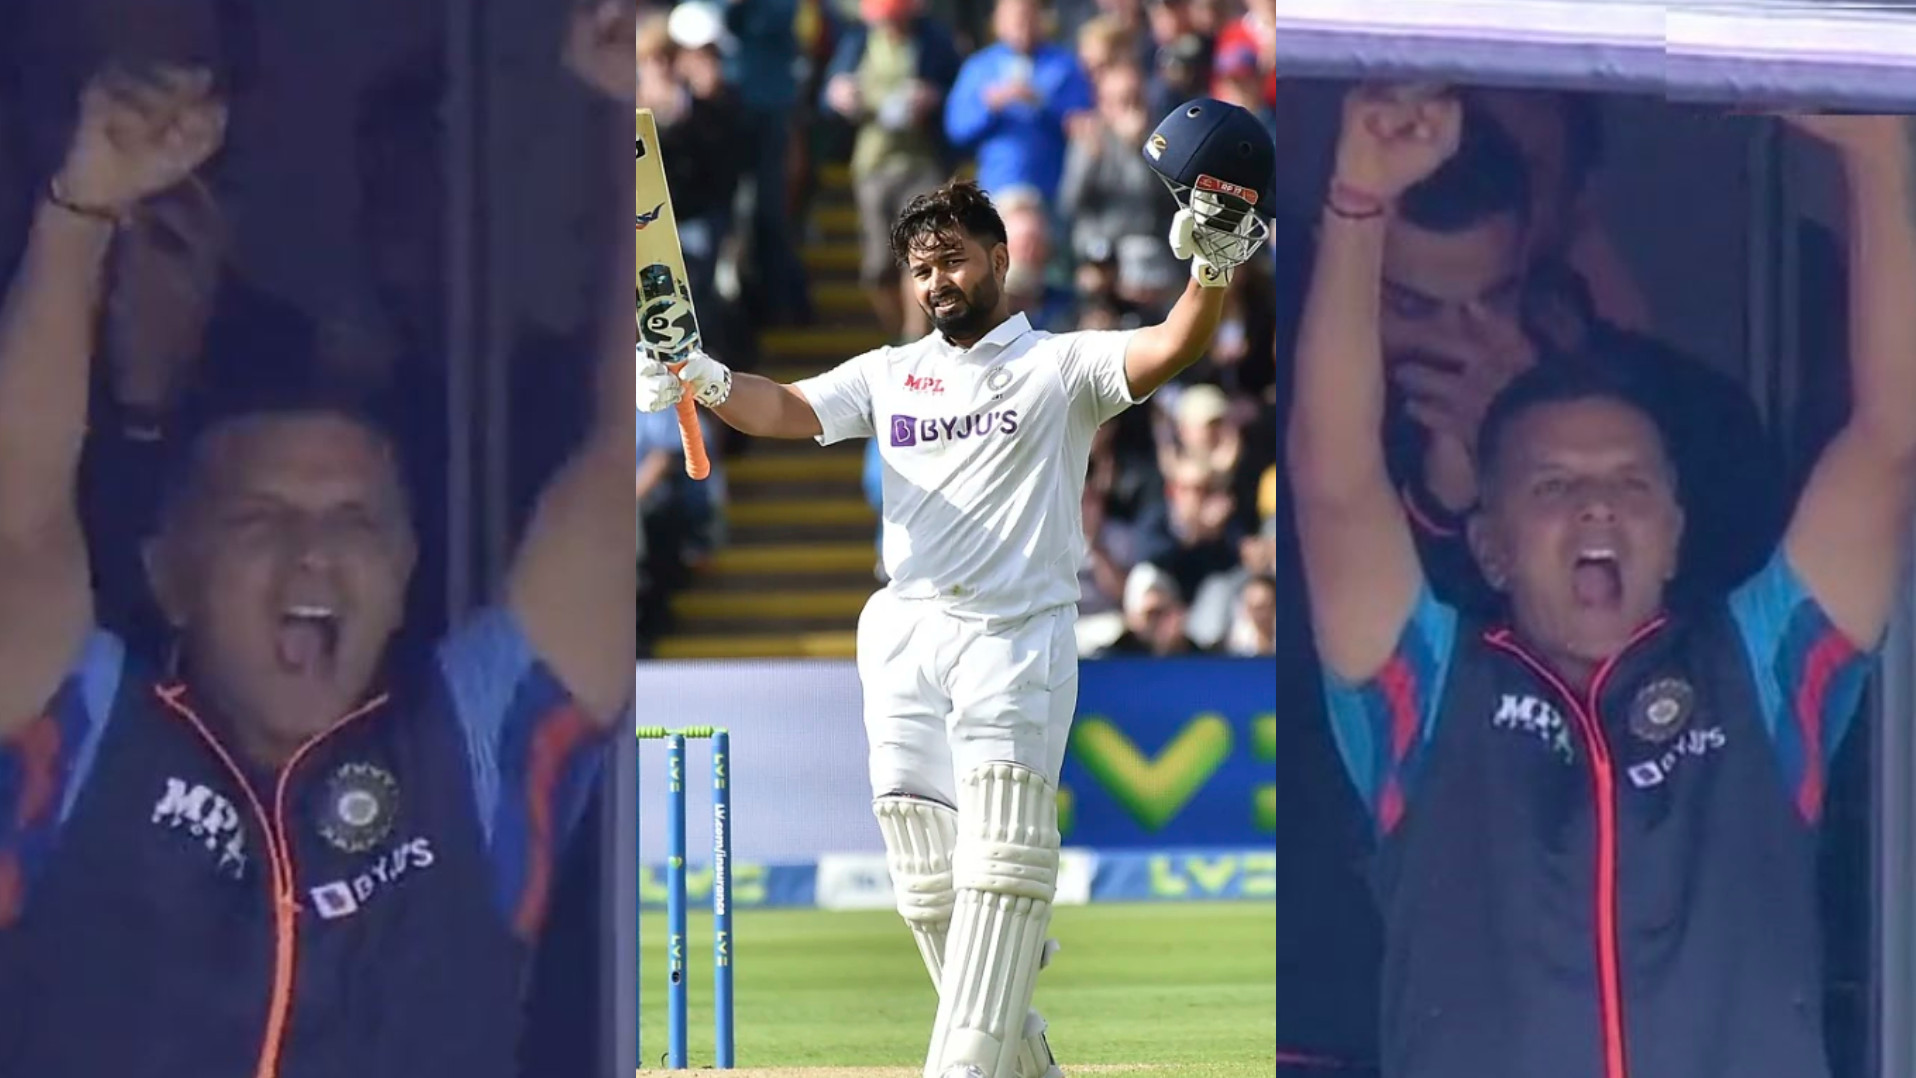 ENG v IND 2022: WATCH- Rahul Dravid’s beyond ecstatic reaction as Rishabh Pant slams his fifth Test century